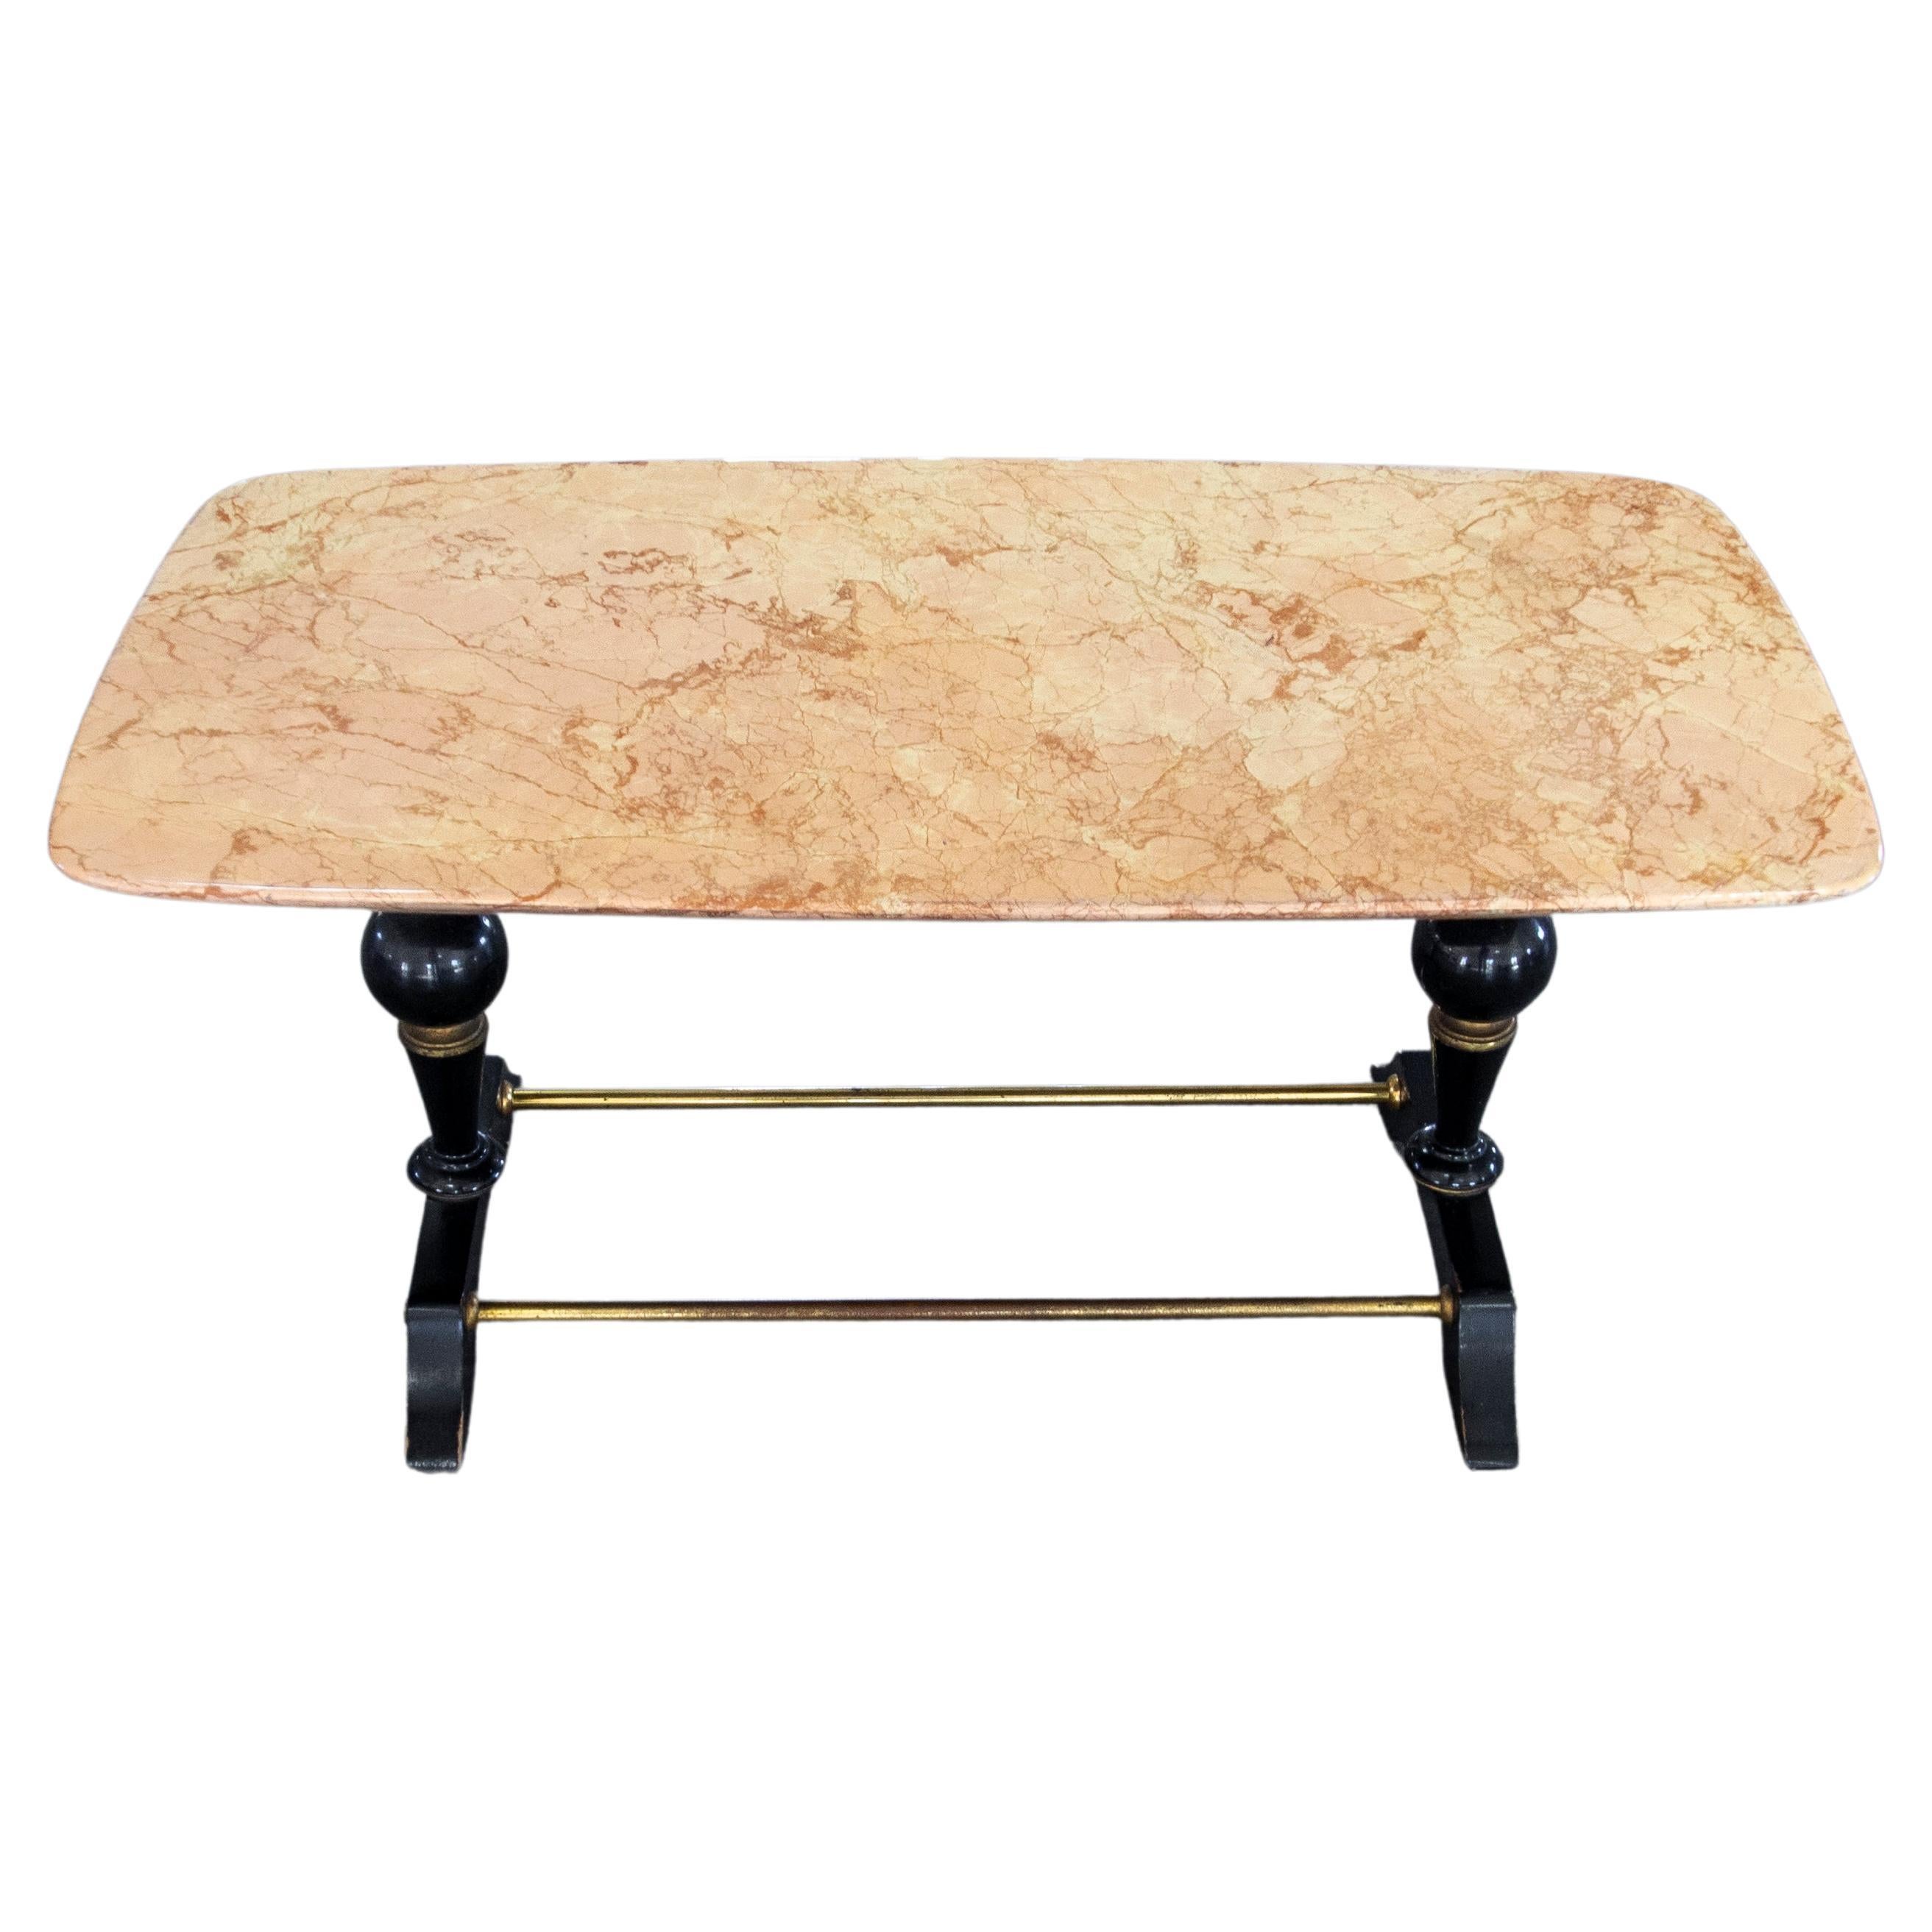 Mid-Century Modern Coffee Table in Marble, Brass and Wood, Italy, 1950s For Sale